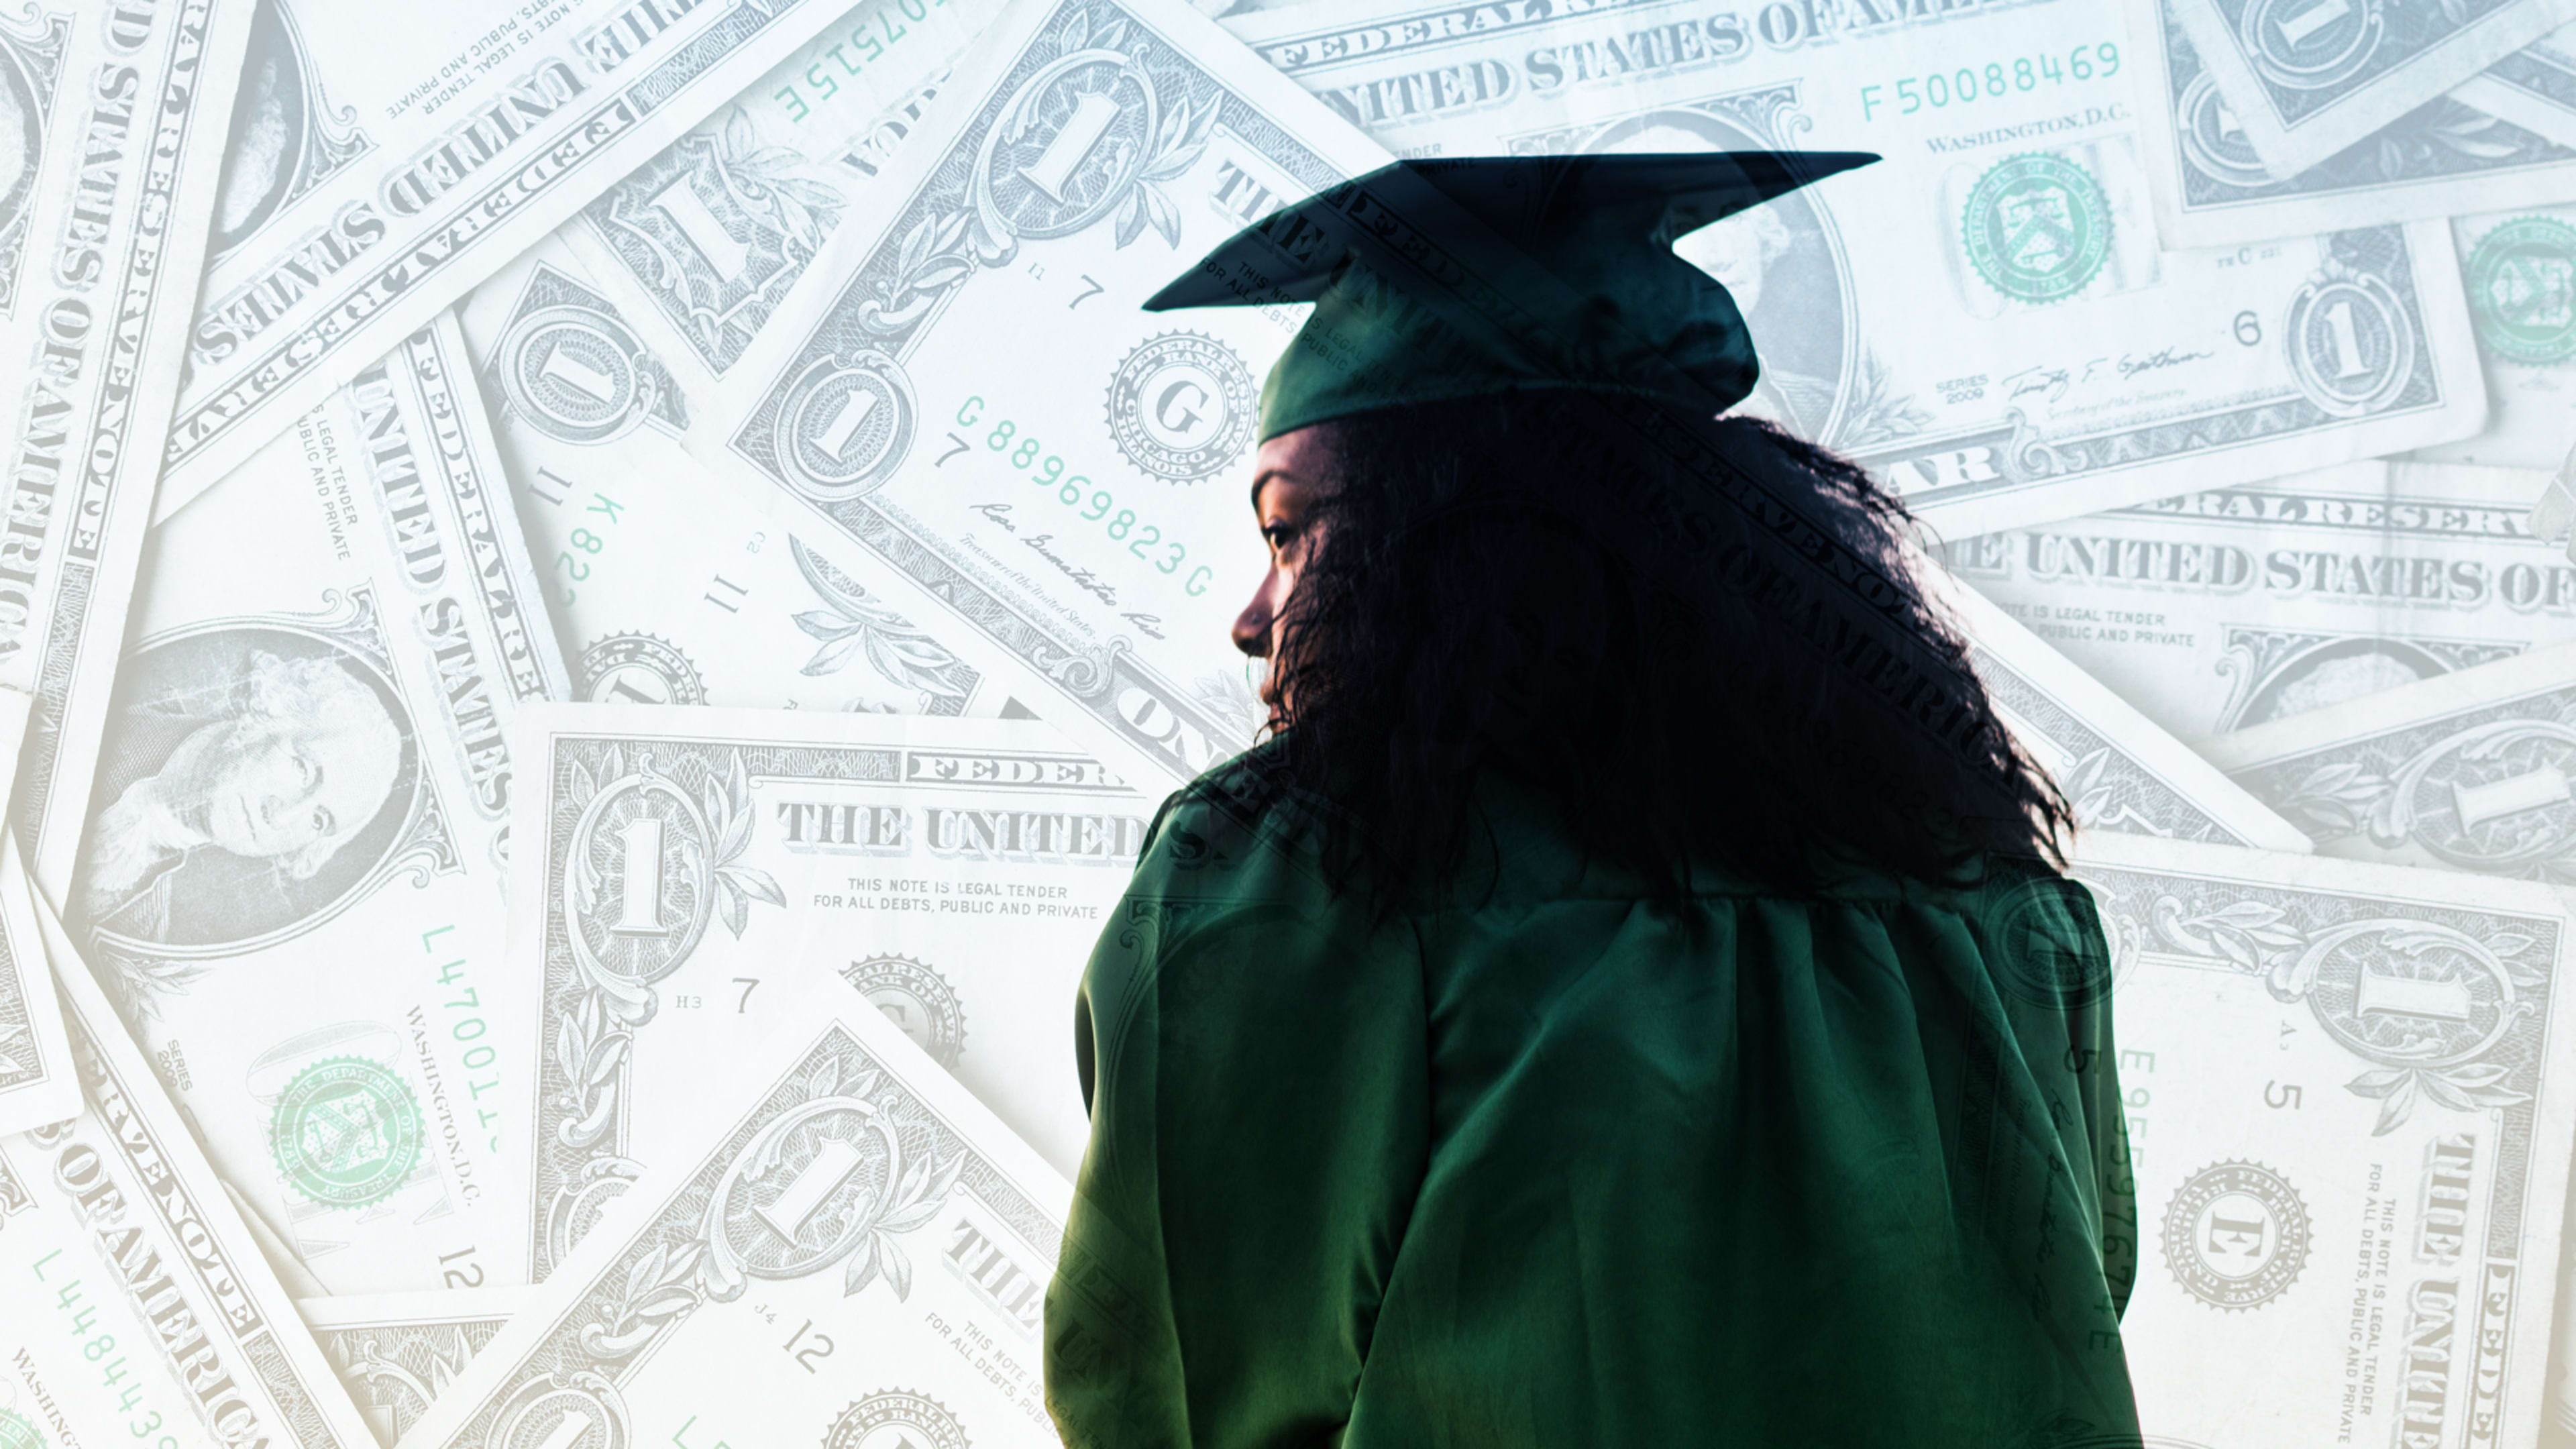 Your student debt could be wiped clean if a DOE official gets his way, but he’s resigning